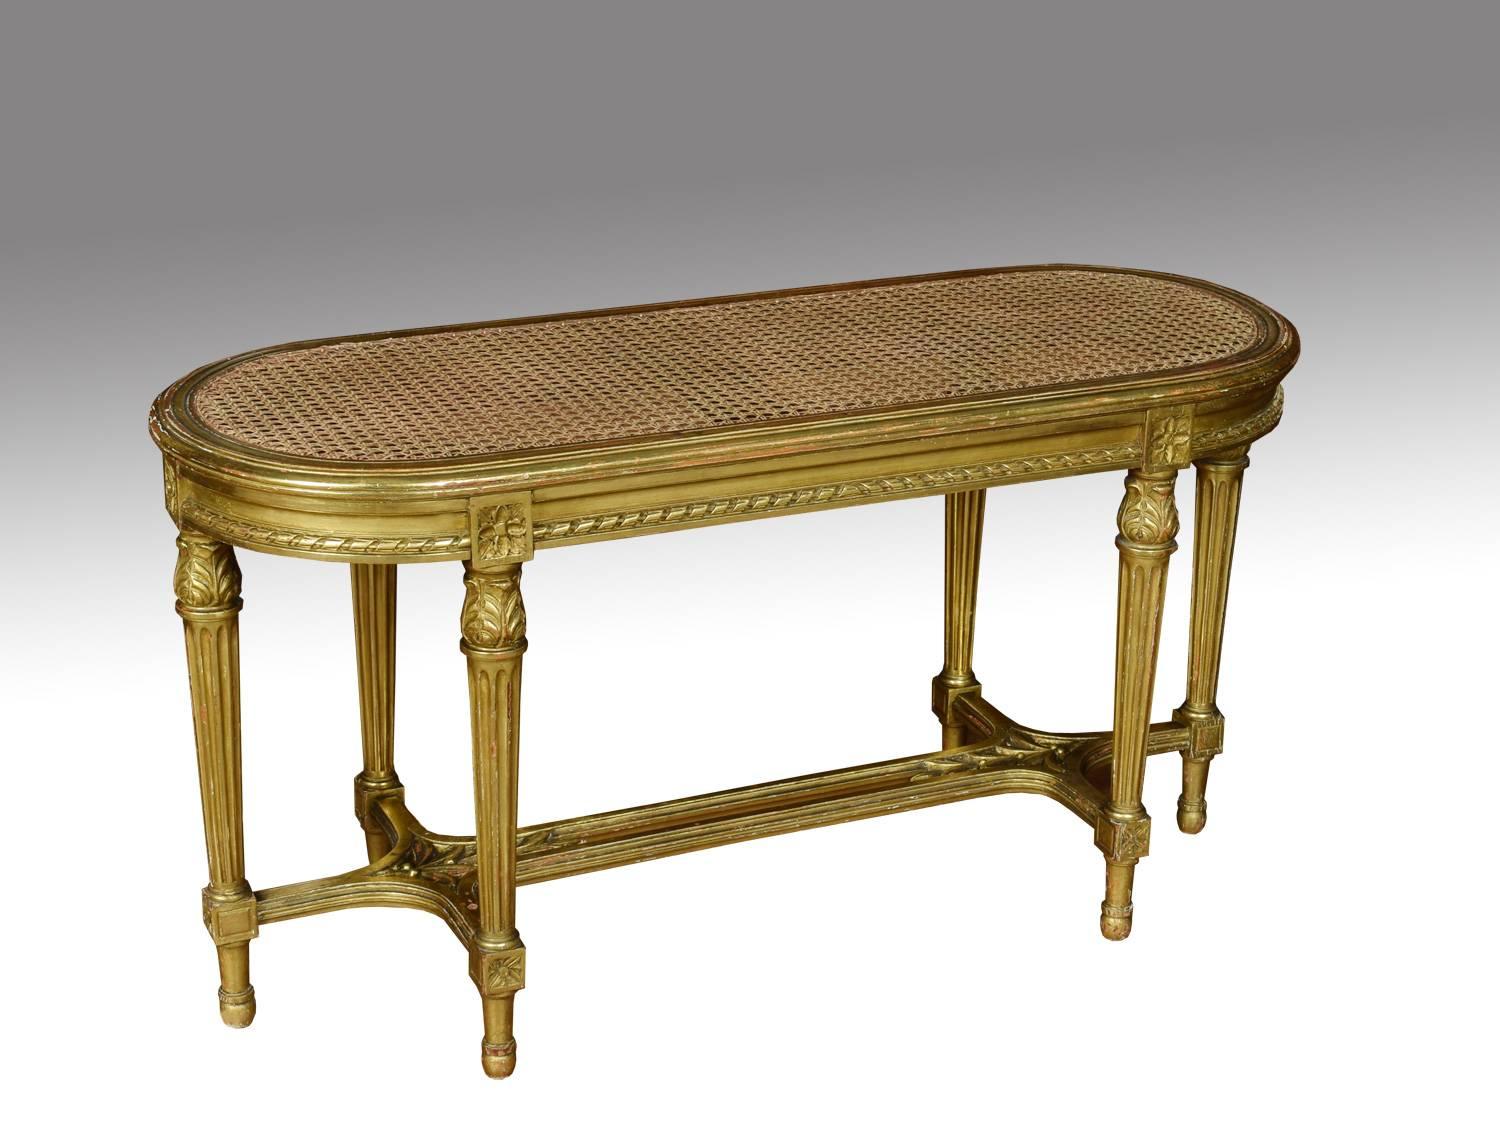 Early 20th century French giltwood oval window seat, having removable upholstered cushion above the shaped bergere seat, within a channelled frame. Above a rope effect frieze raised up on six acanthus leaf and fluted column legs united by leaf and